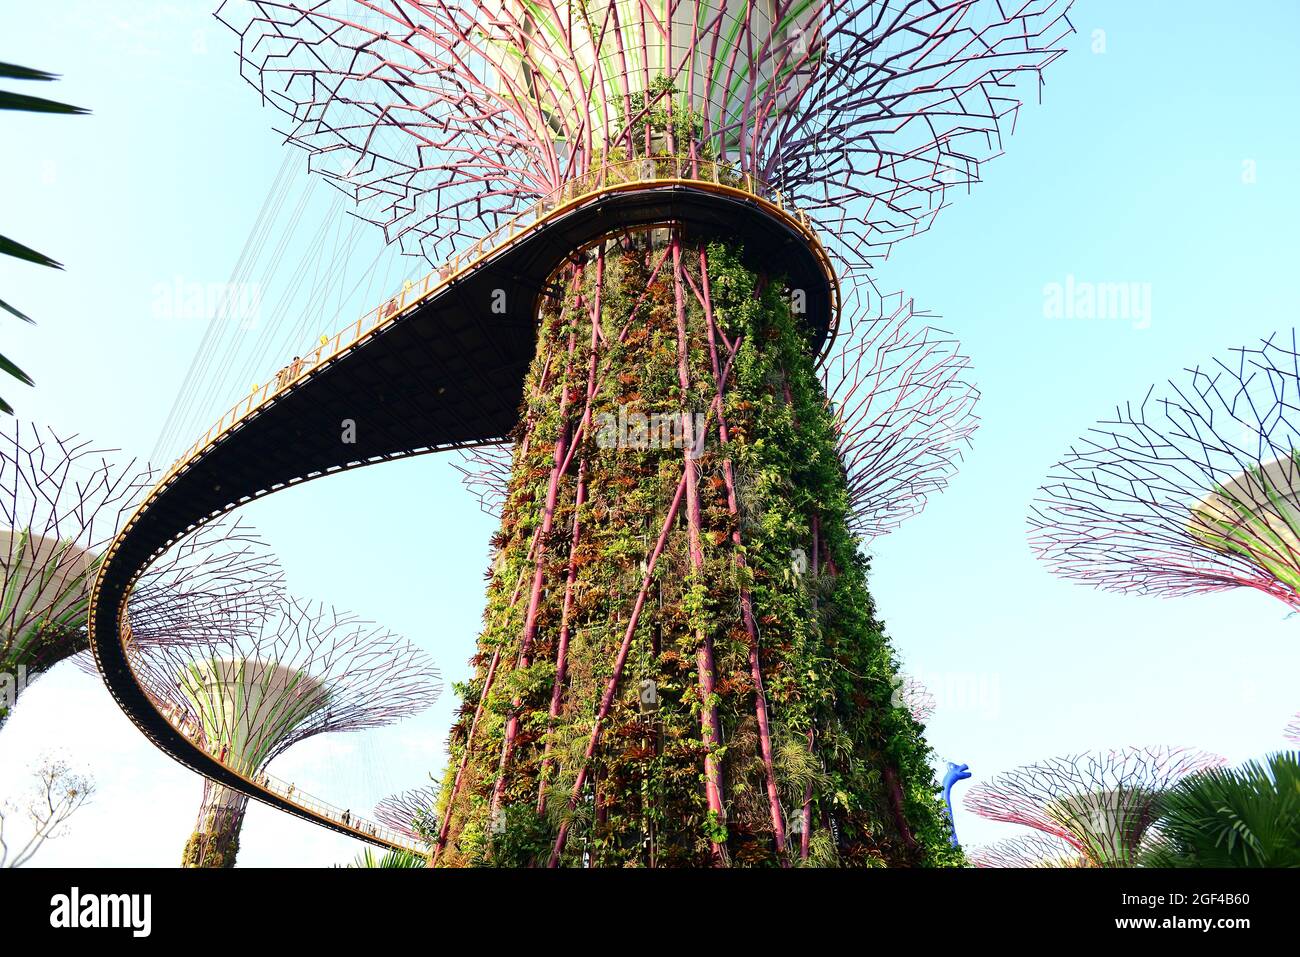 Singapore, Gardens by the Bay. Foto Stock